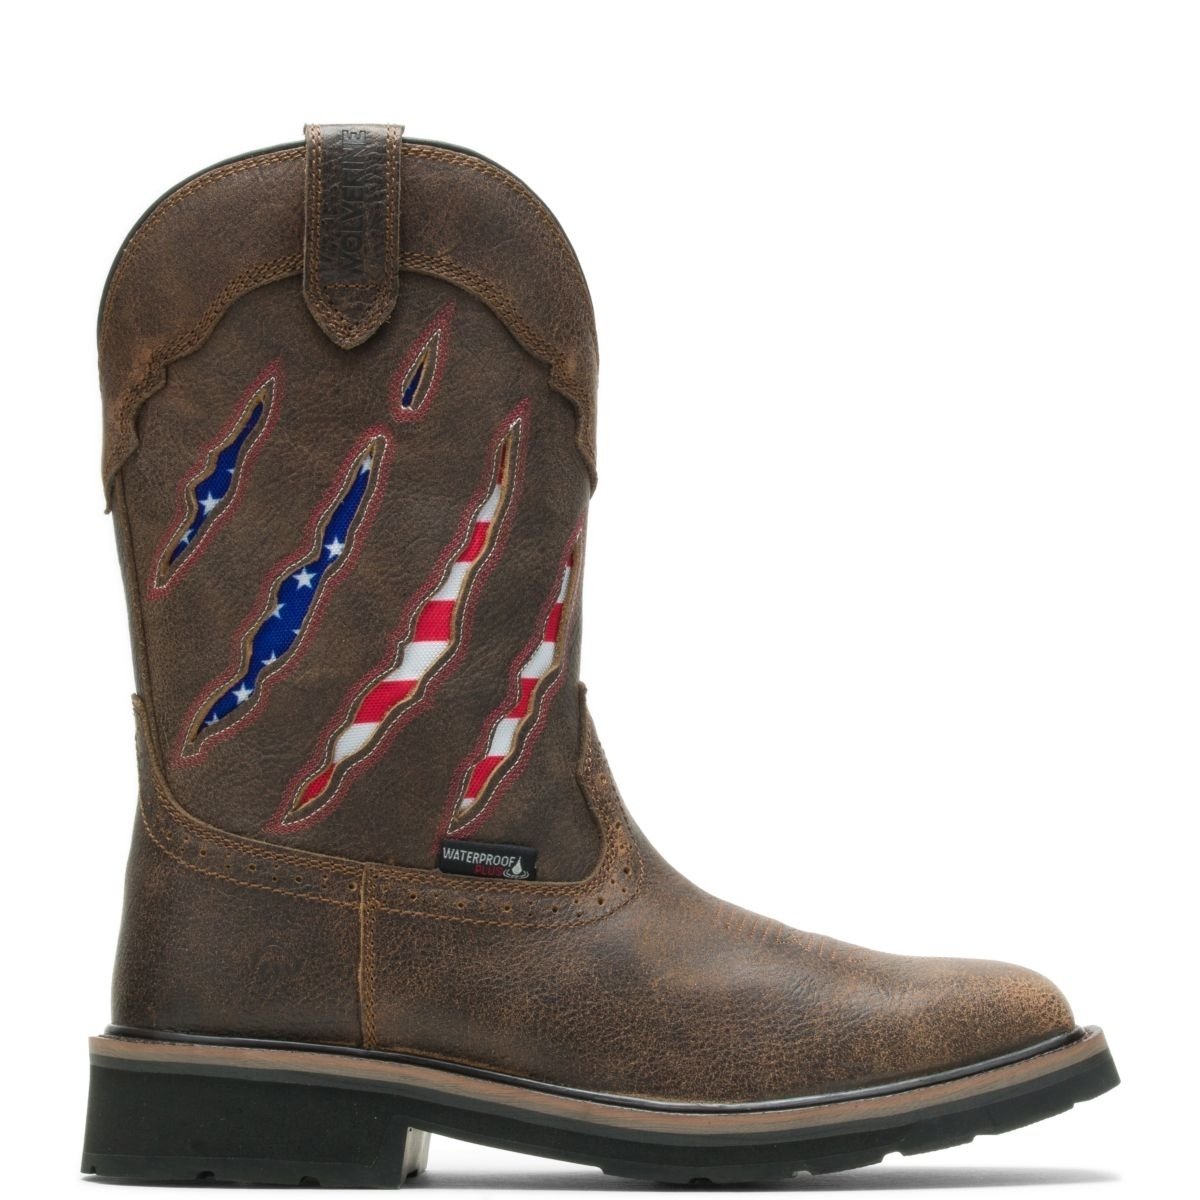 WOLVERINE Men's Rancher Claw Wellington Soft Toe Work Boot Brown/Flag - W200138 Flag/brown - Flag/brown, 8 X-Wide